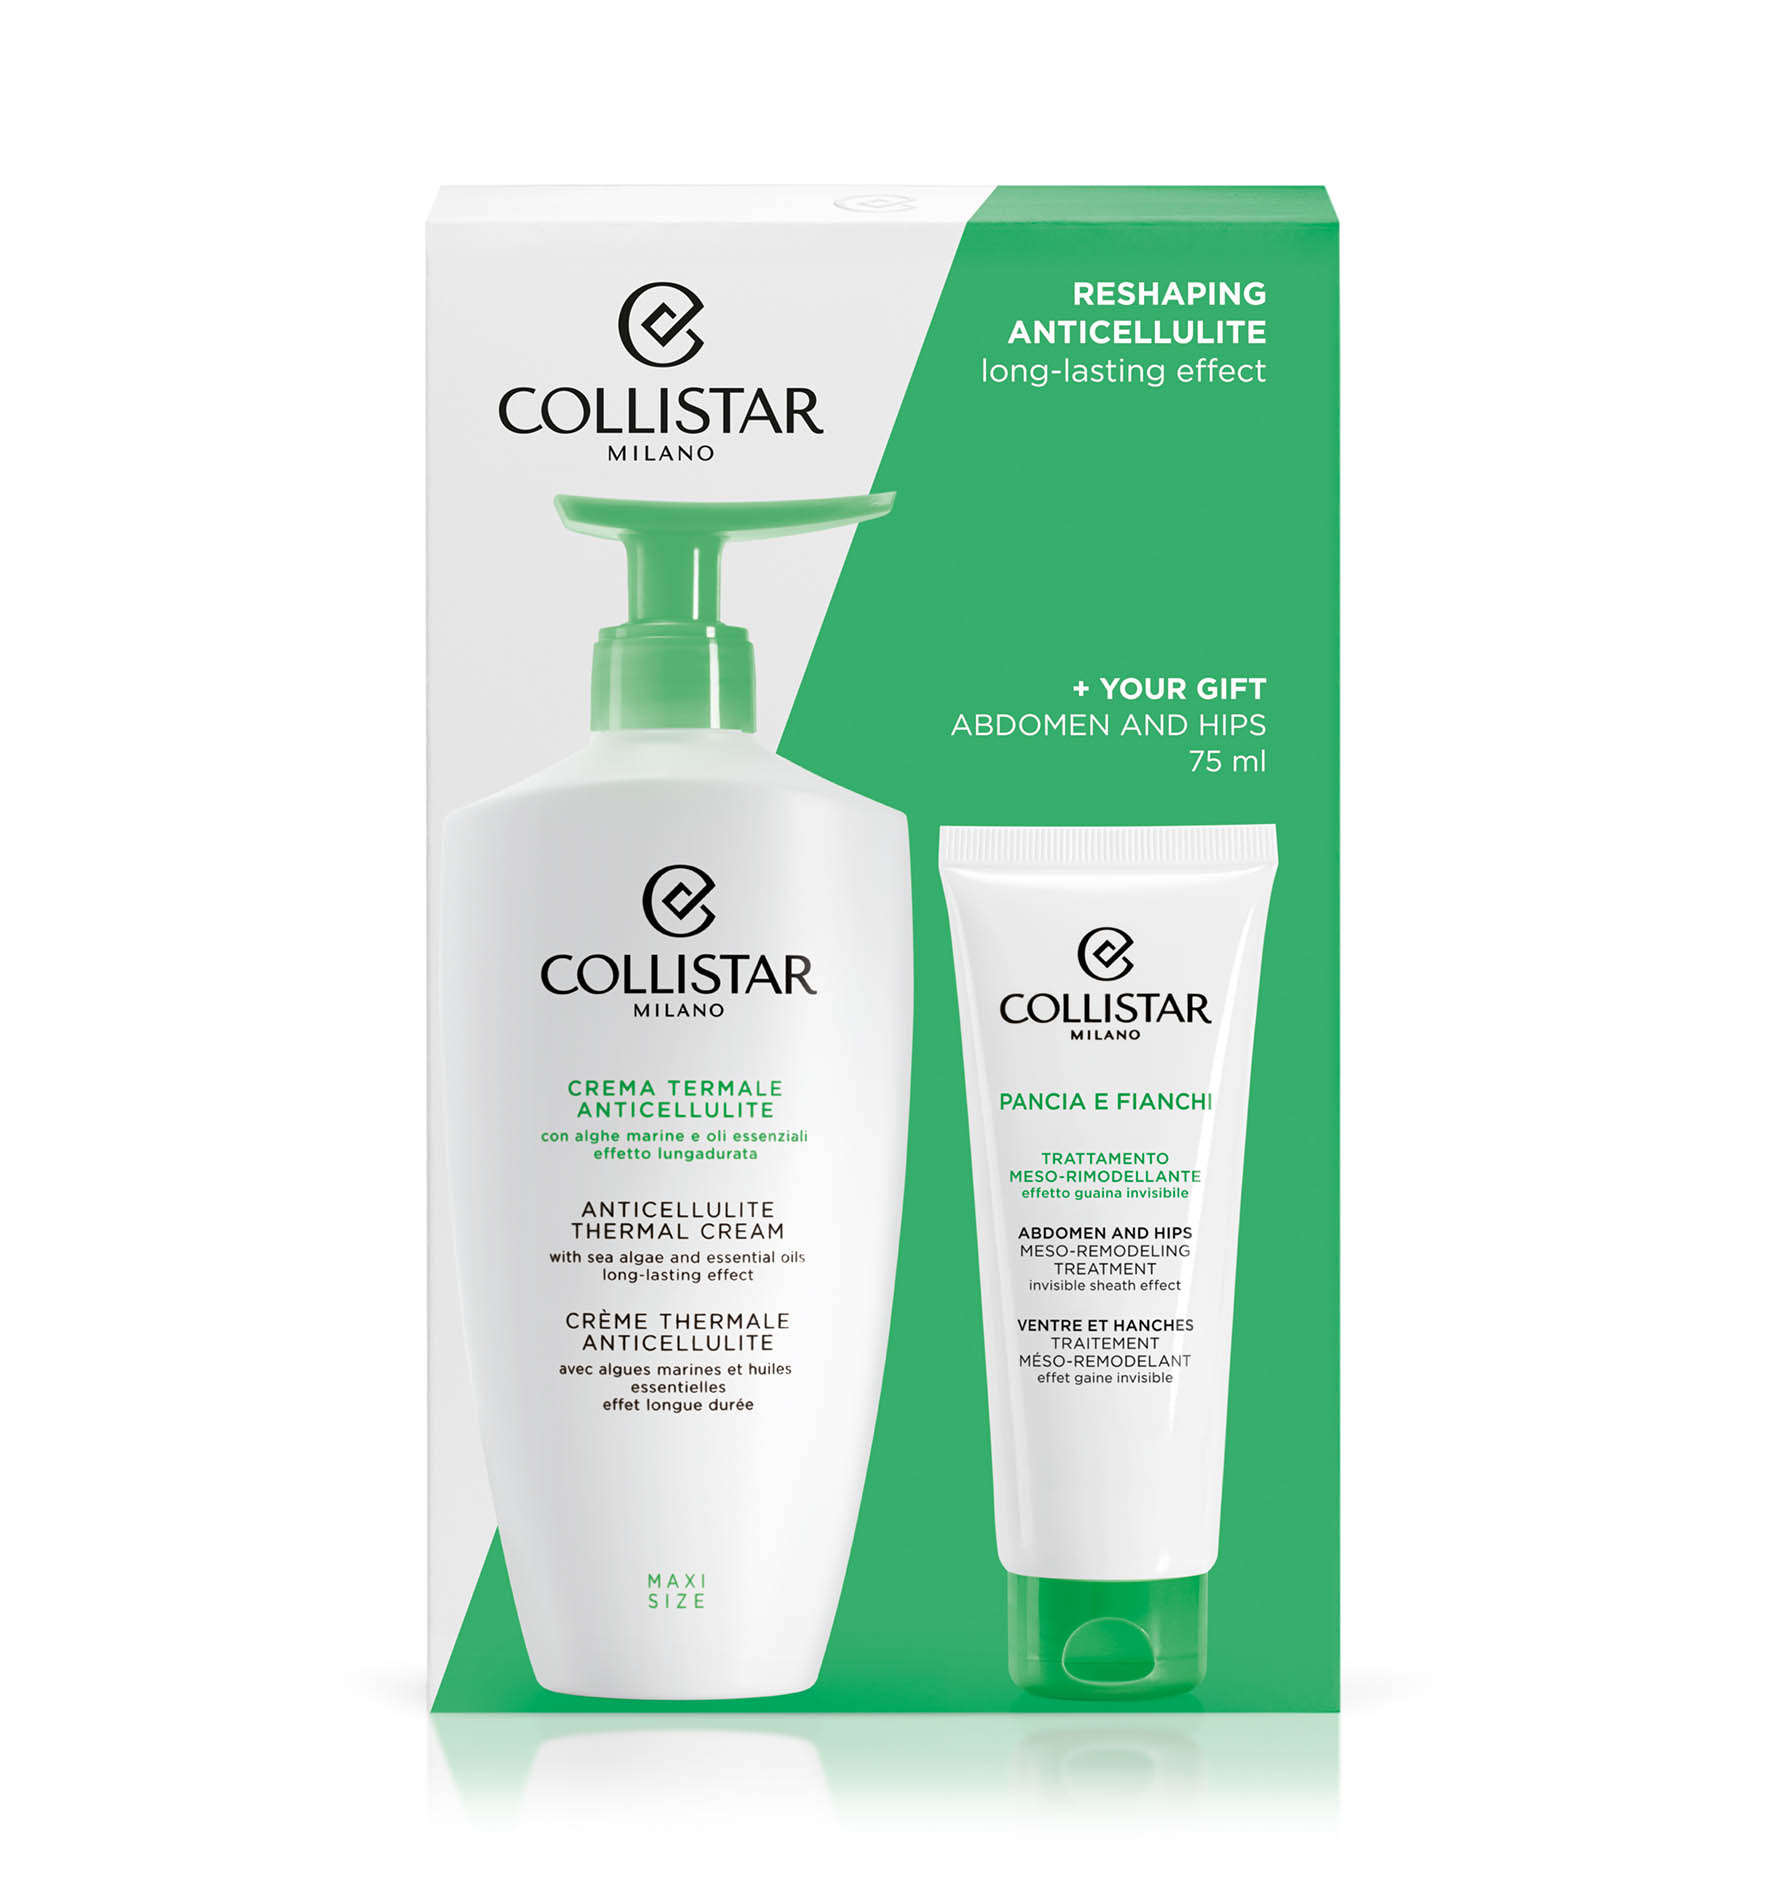 SET RESHAPING ANTICELLULITE long-lasting effect - Firming | Collistar - Shop Online Ufficiale